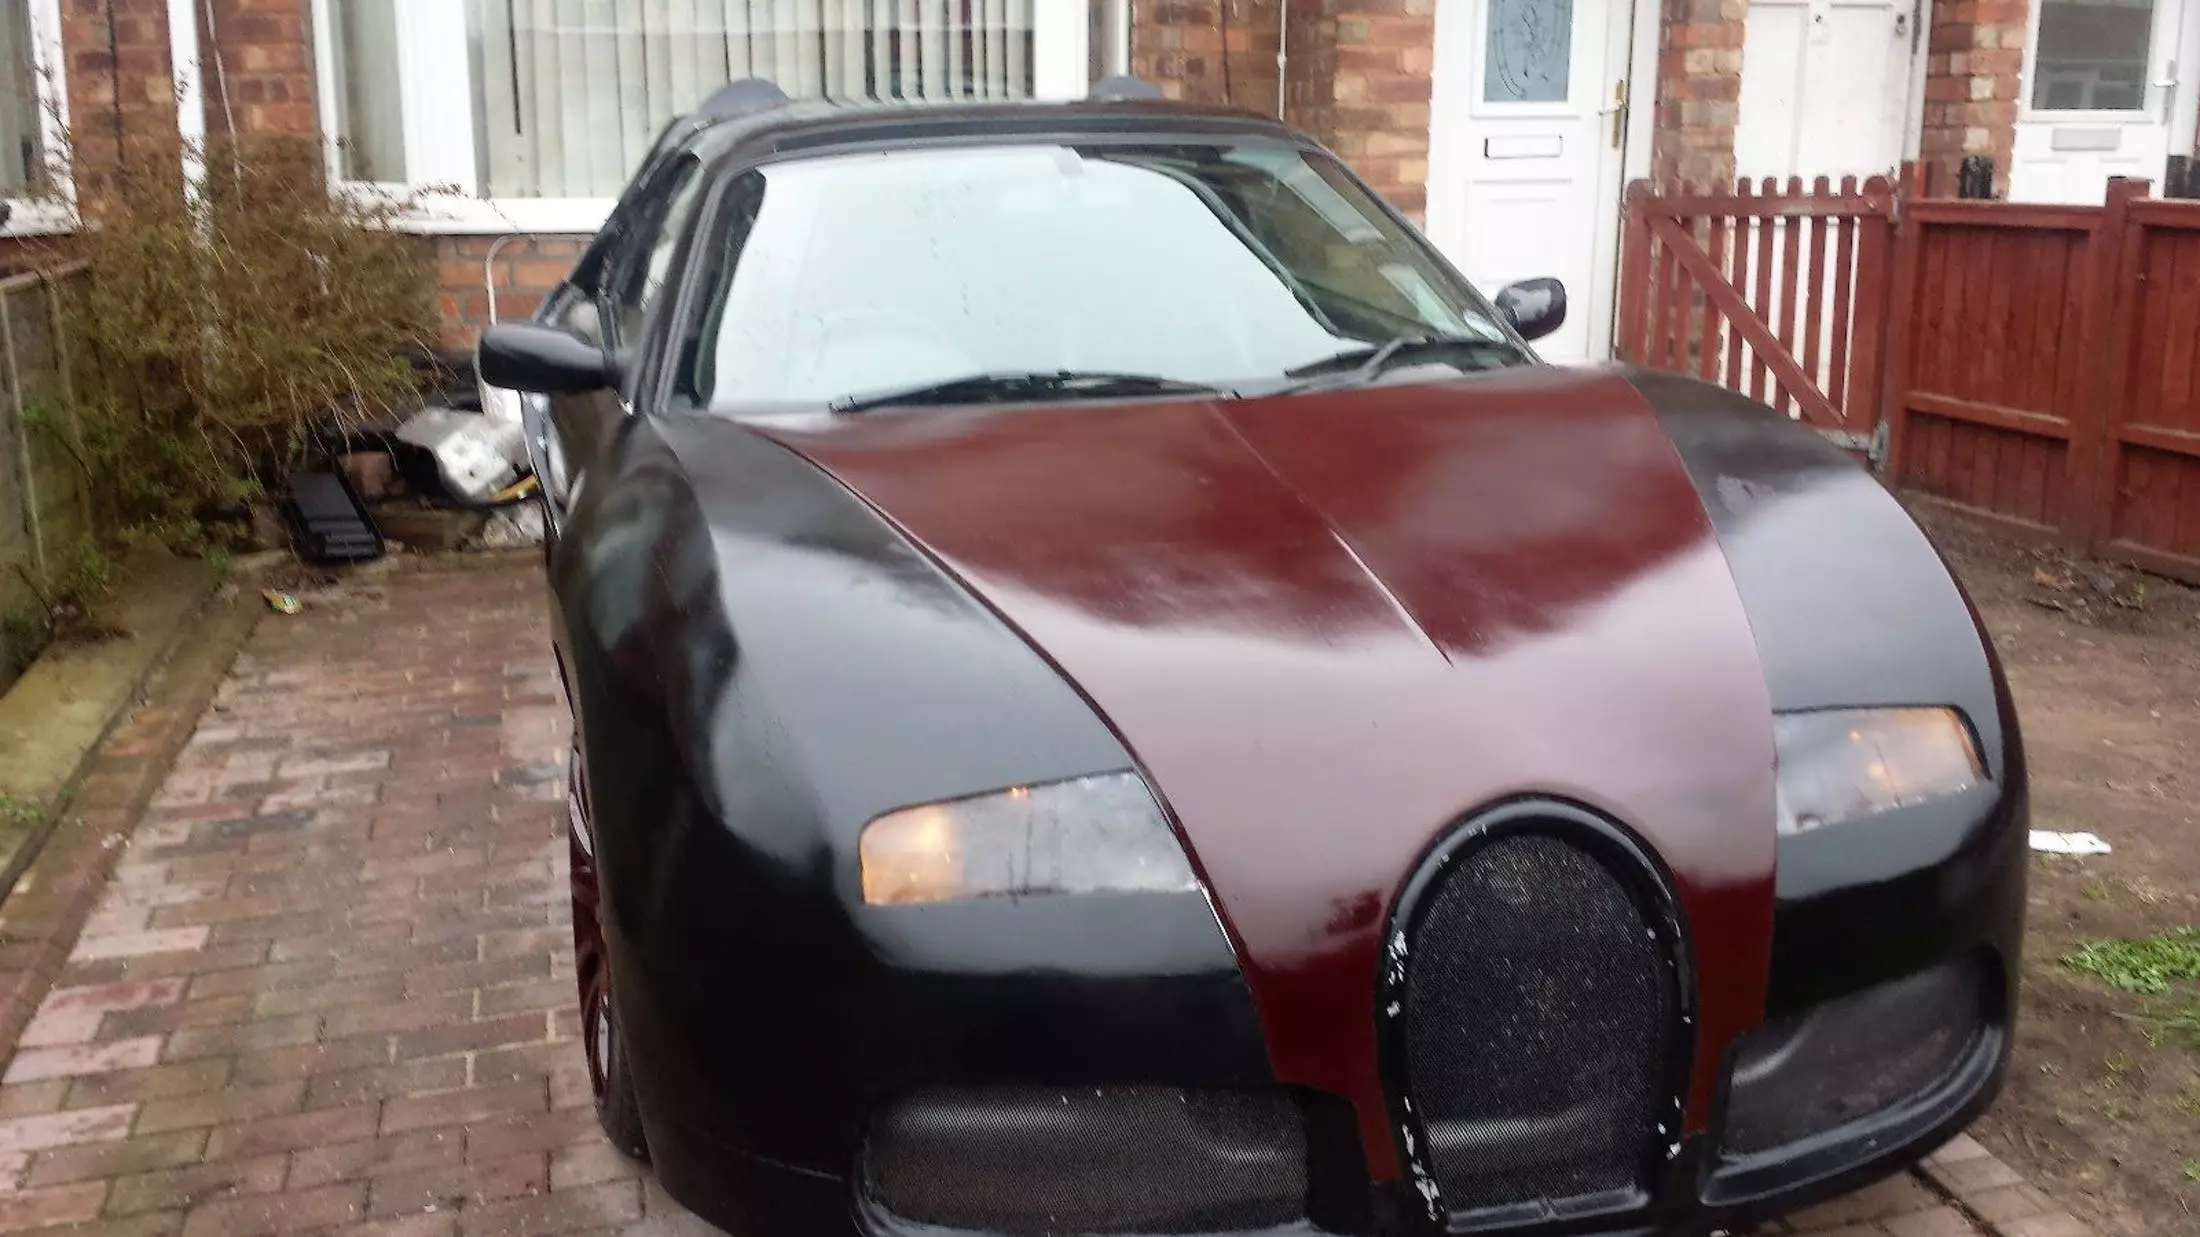 Man Flogs MG-Come-Bugatti On eBay After Doing Some Serious Modifications